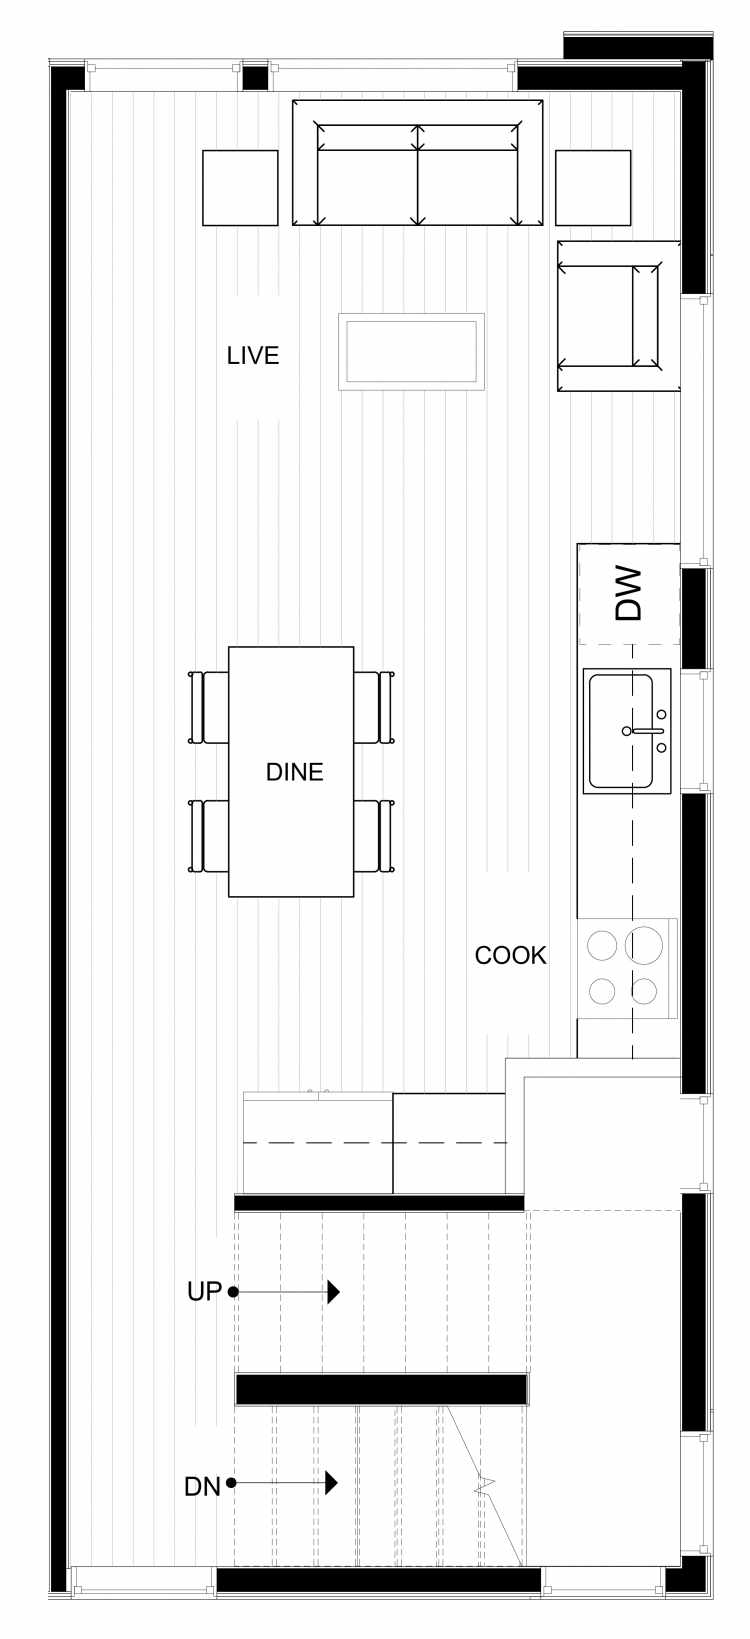 Third Floor Plan of 1539 Grandview Pl E, One of the Grandview Townhomes in Capitol Hill